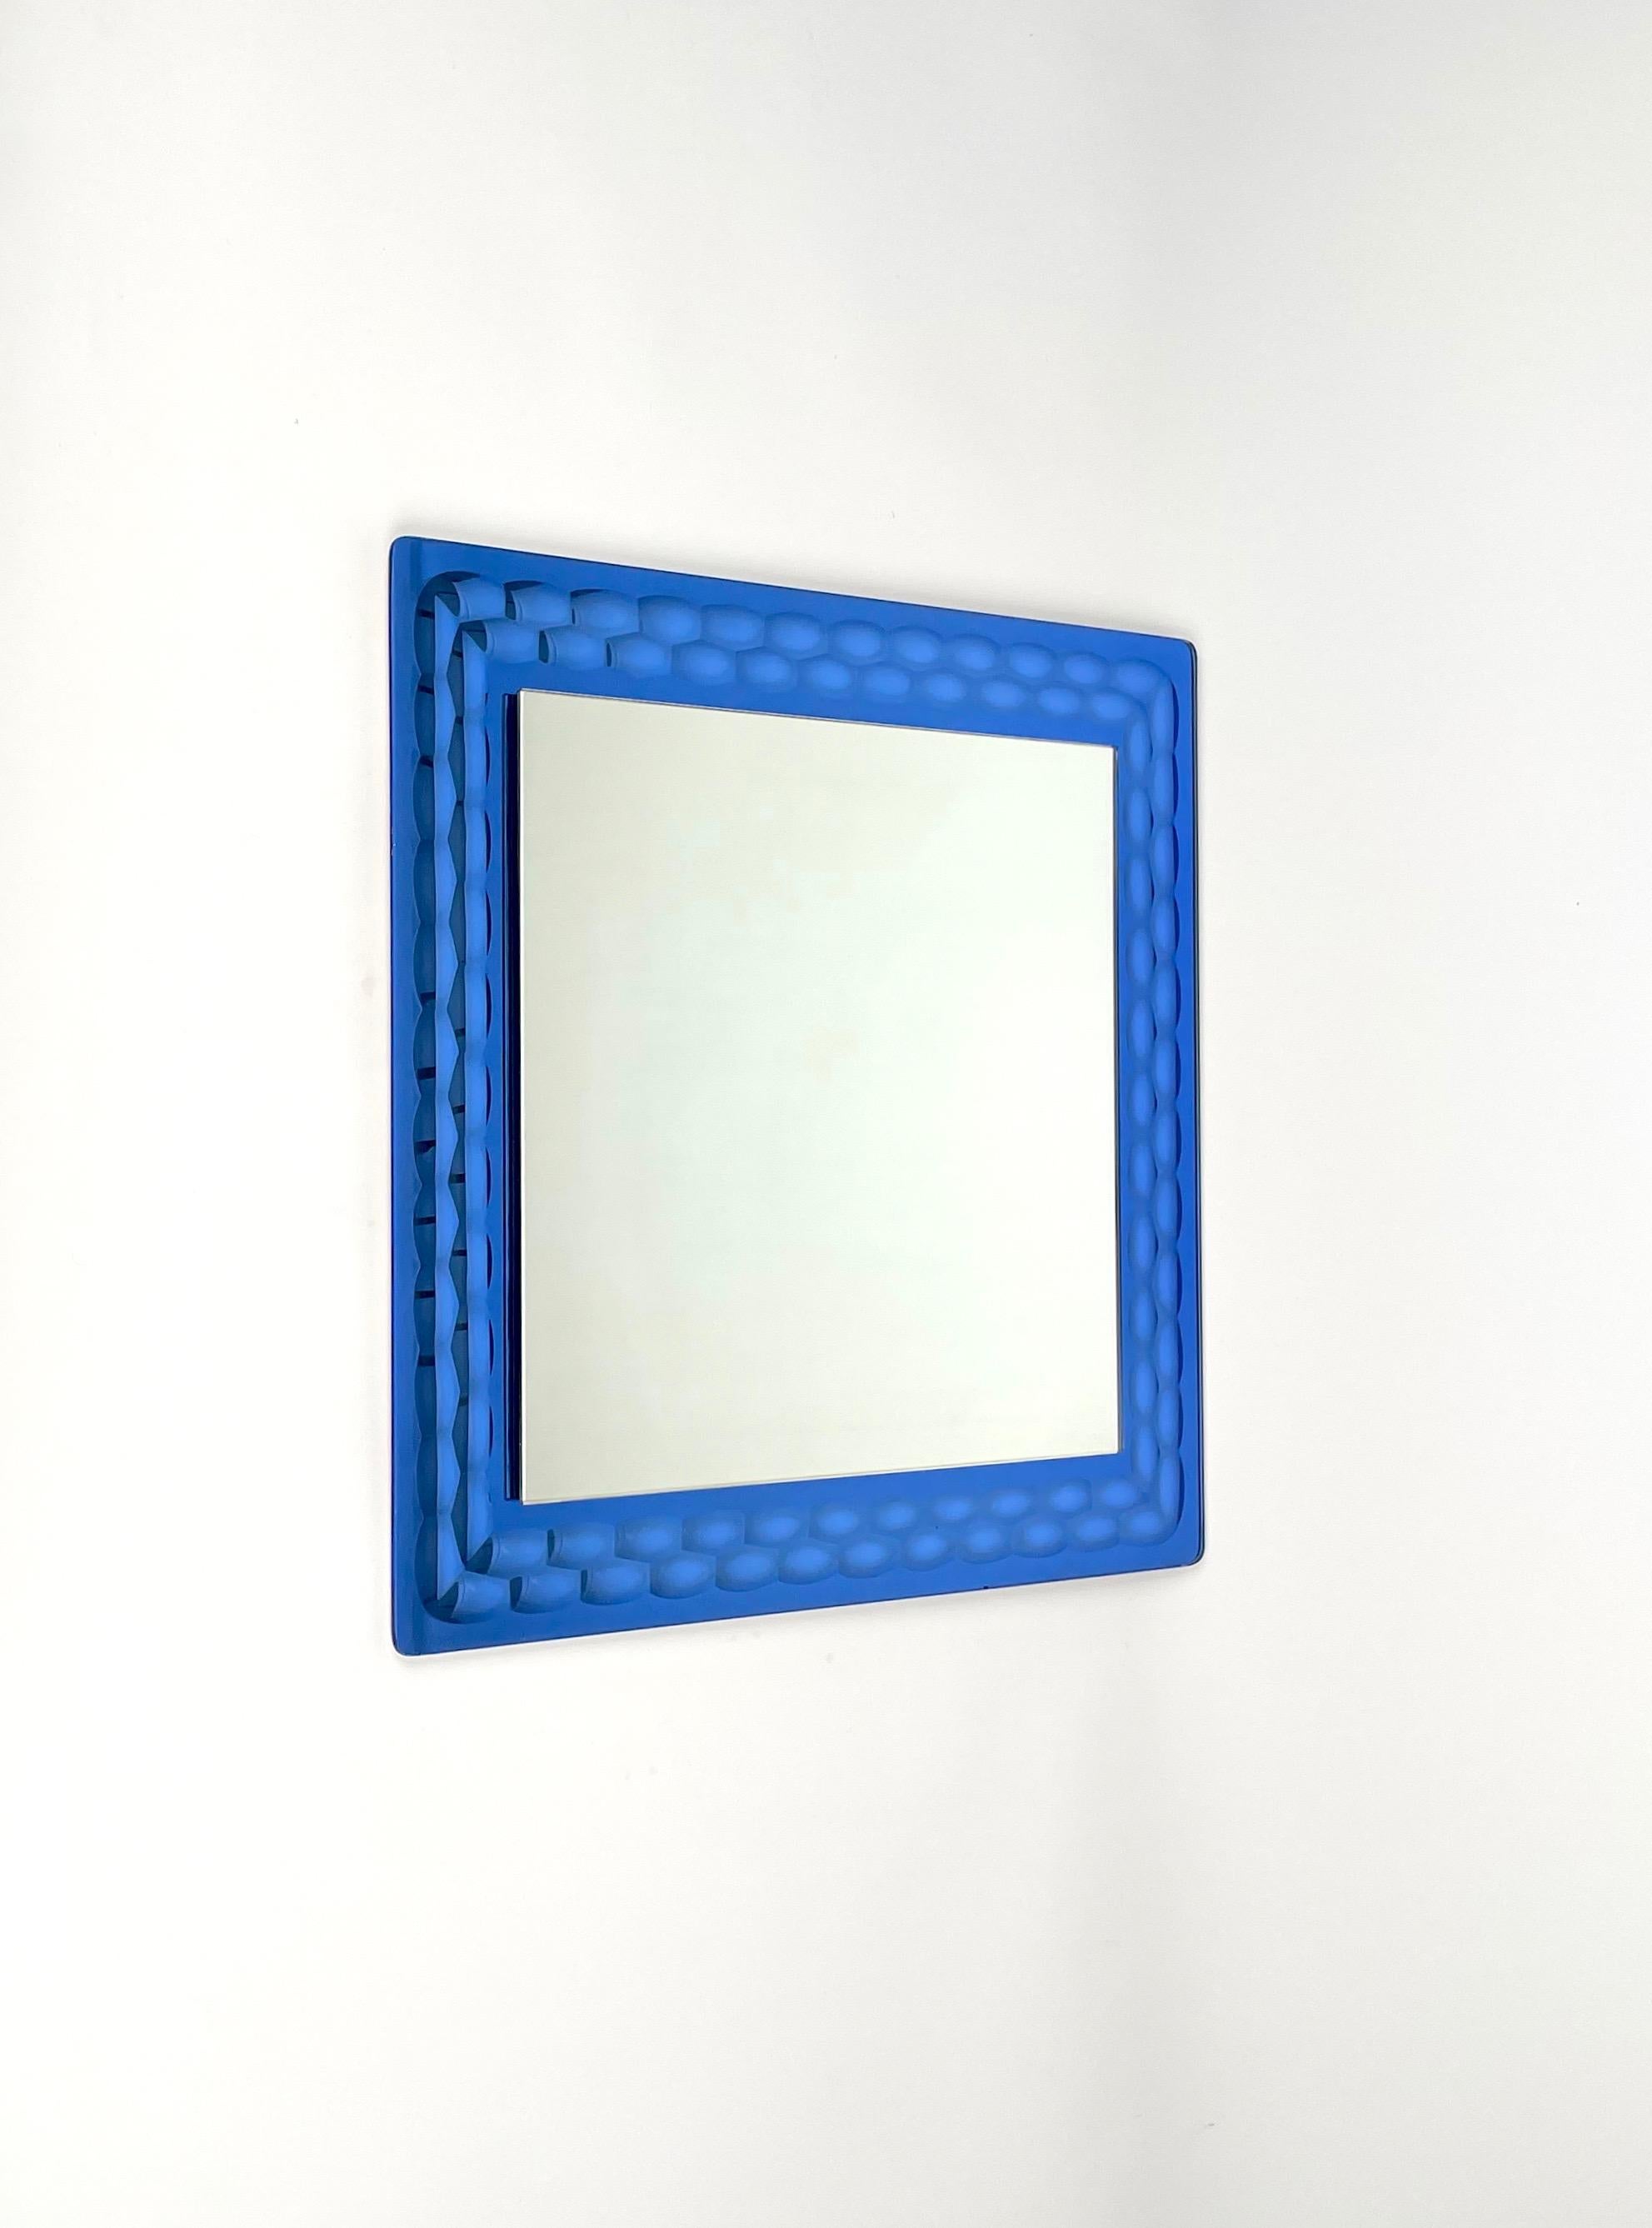 Mid-Century Modern Squared Blue Wall Mirror by Lupi Cristal Luxor, Italy, 1960s For Sale